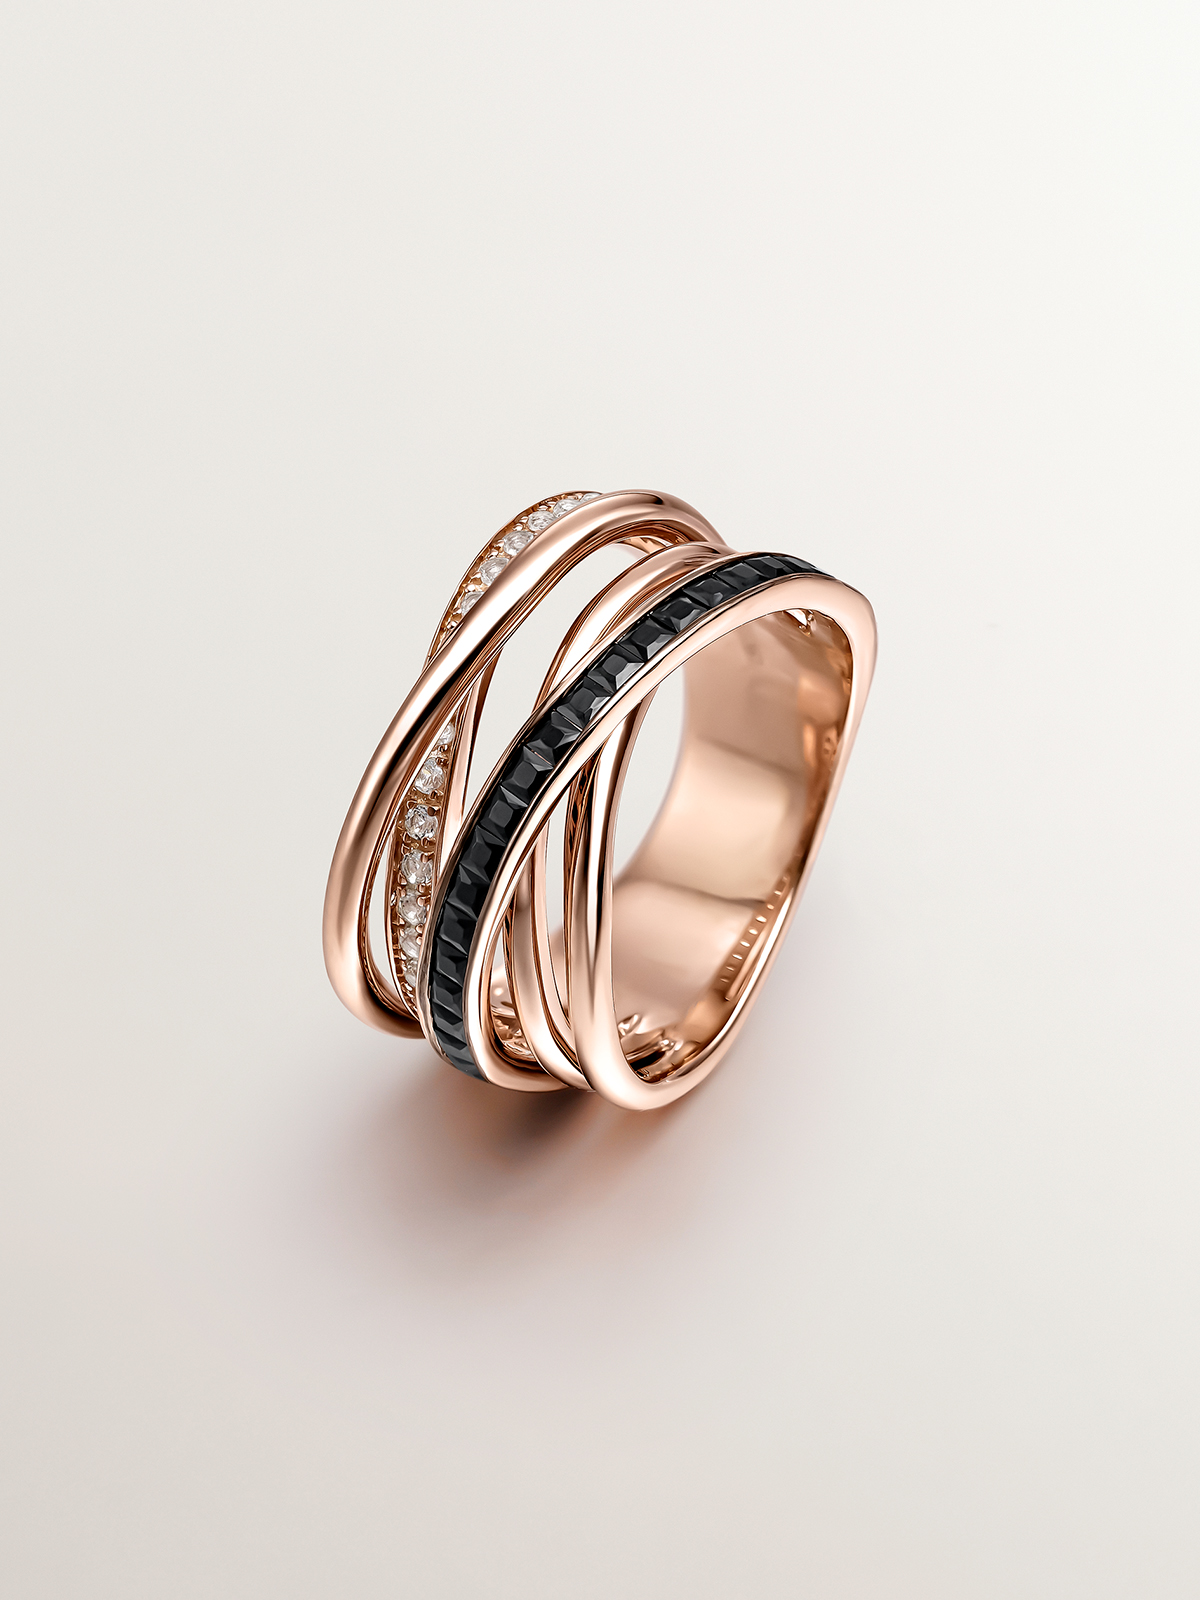 Multi-arm 925 silver ring bathed in 18K rose gold with white topaz and black spinel.